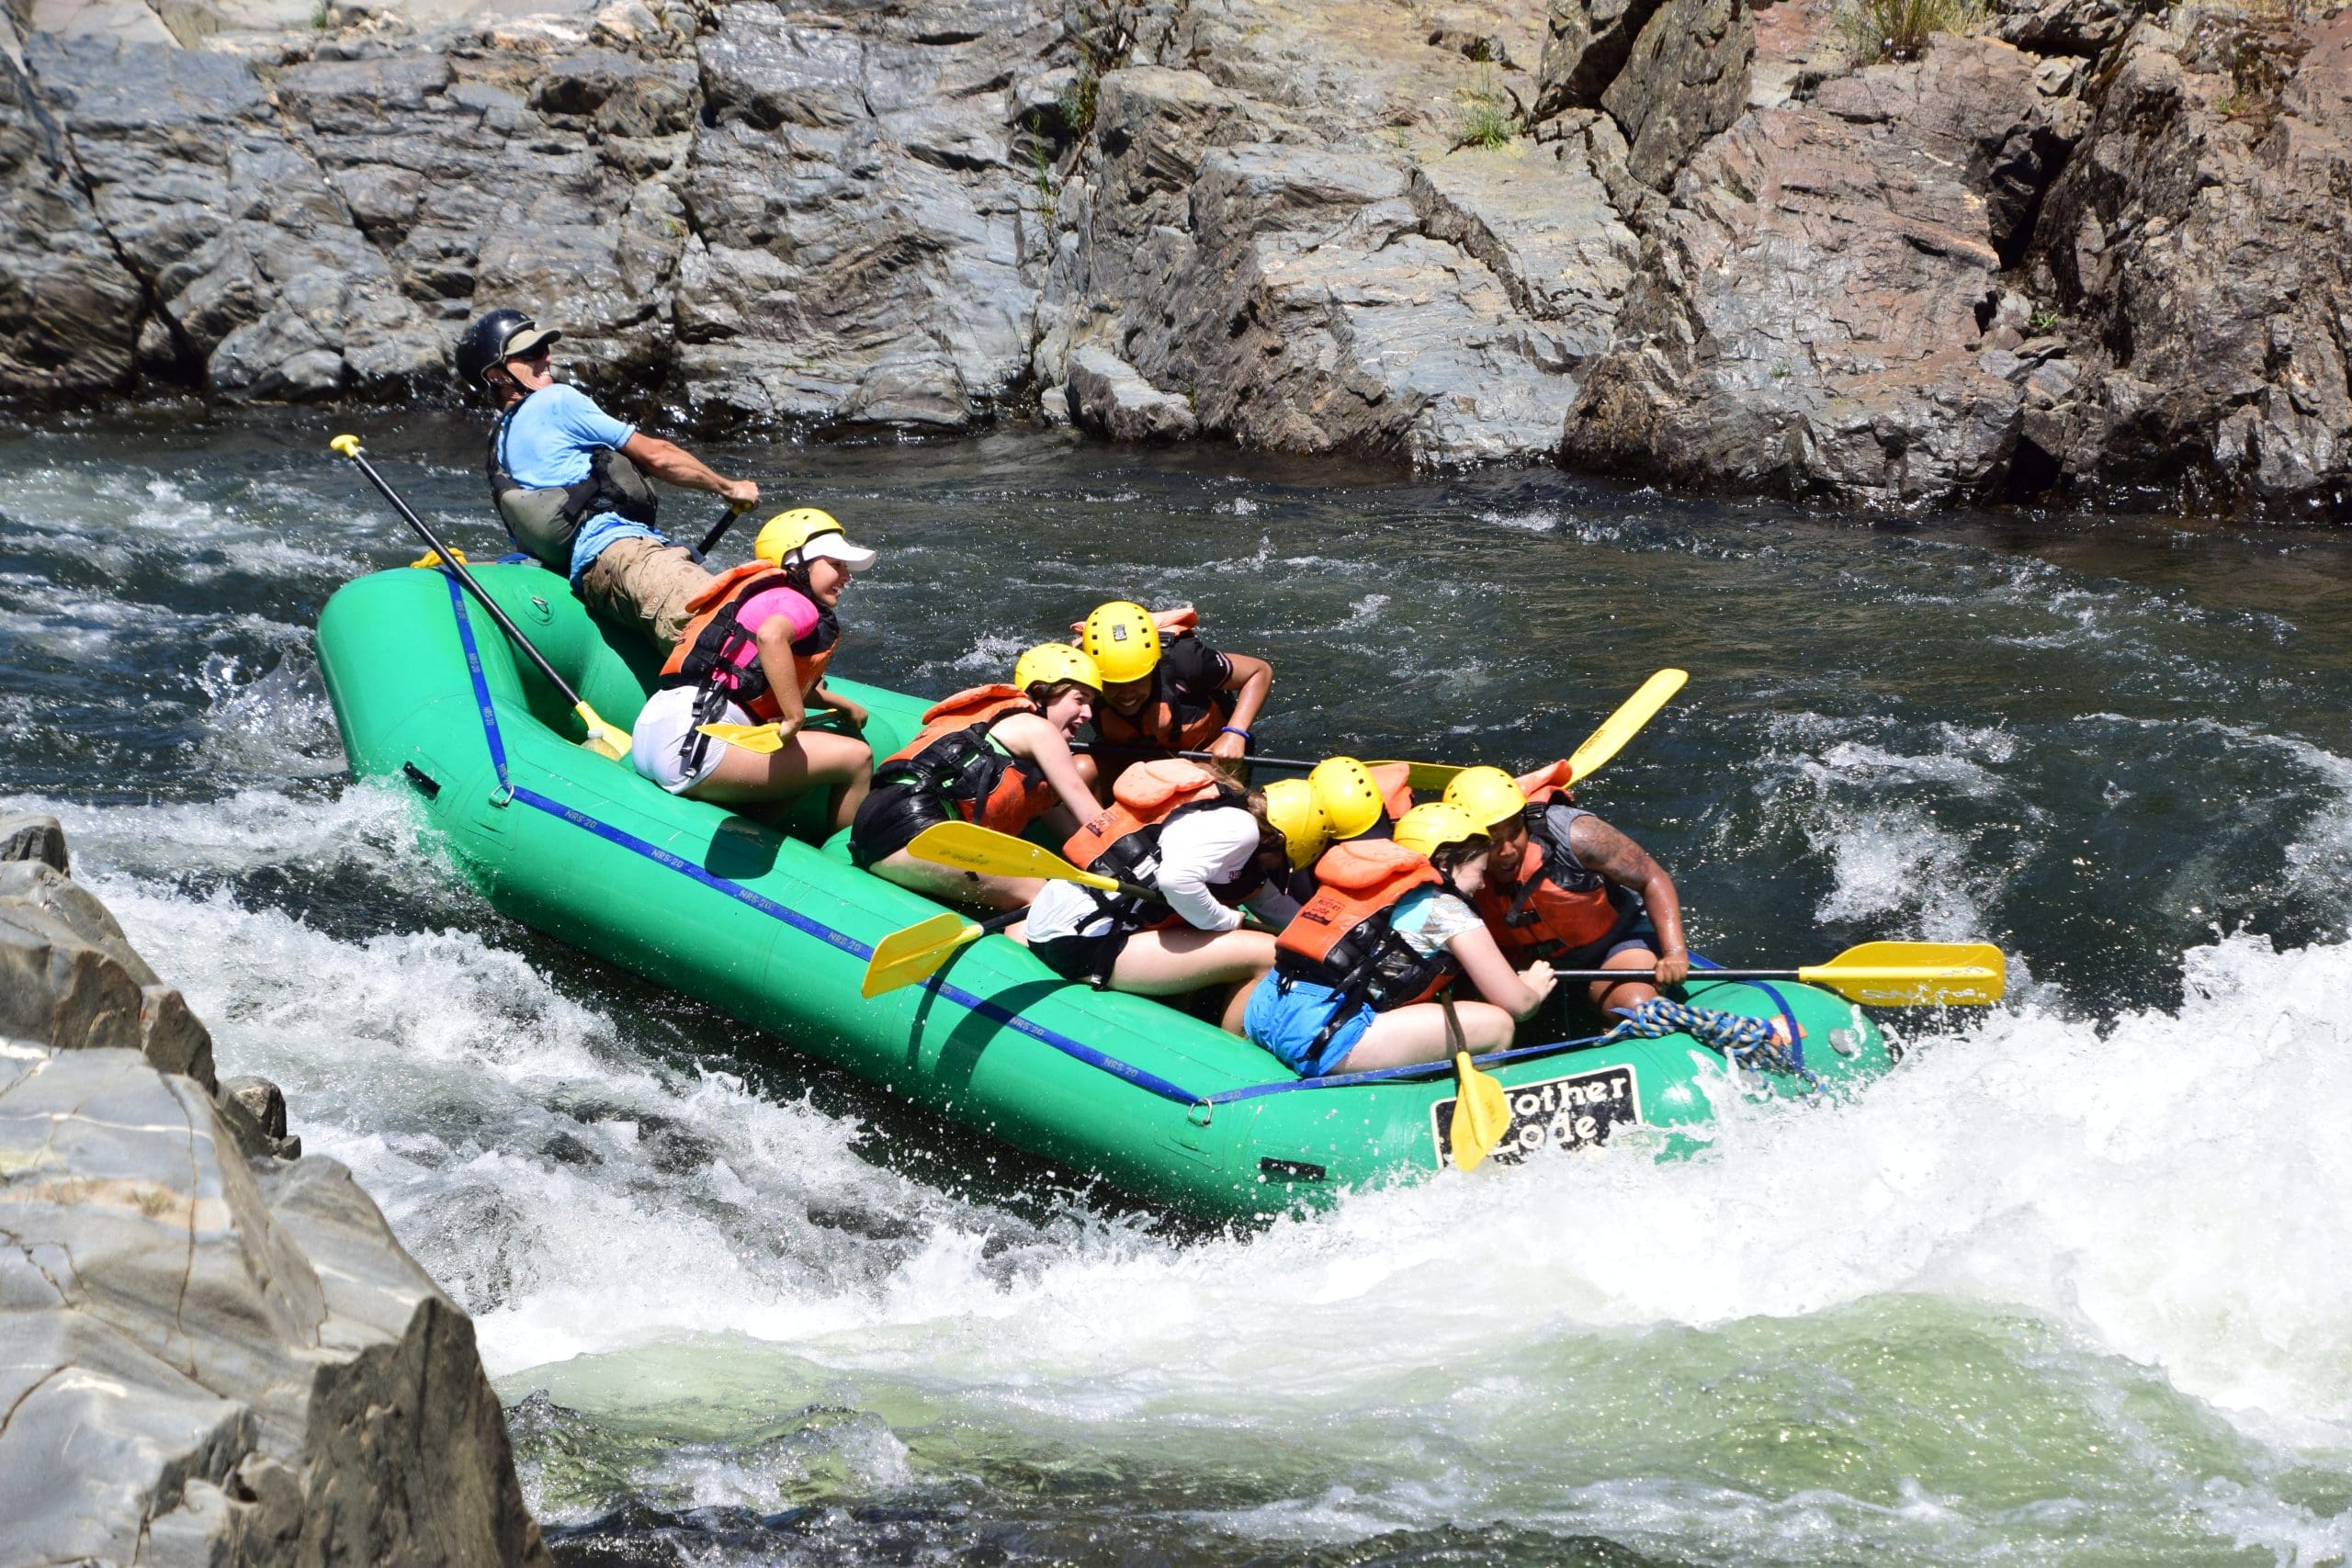 Rafting with Mother Lode on The South Fork American River Gorge